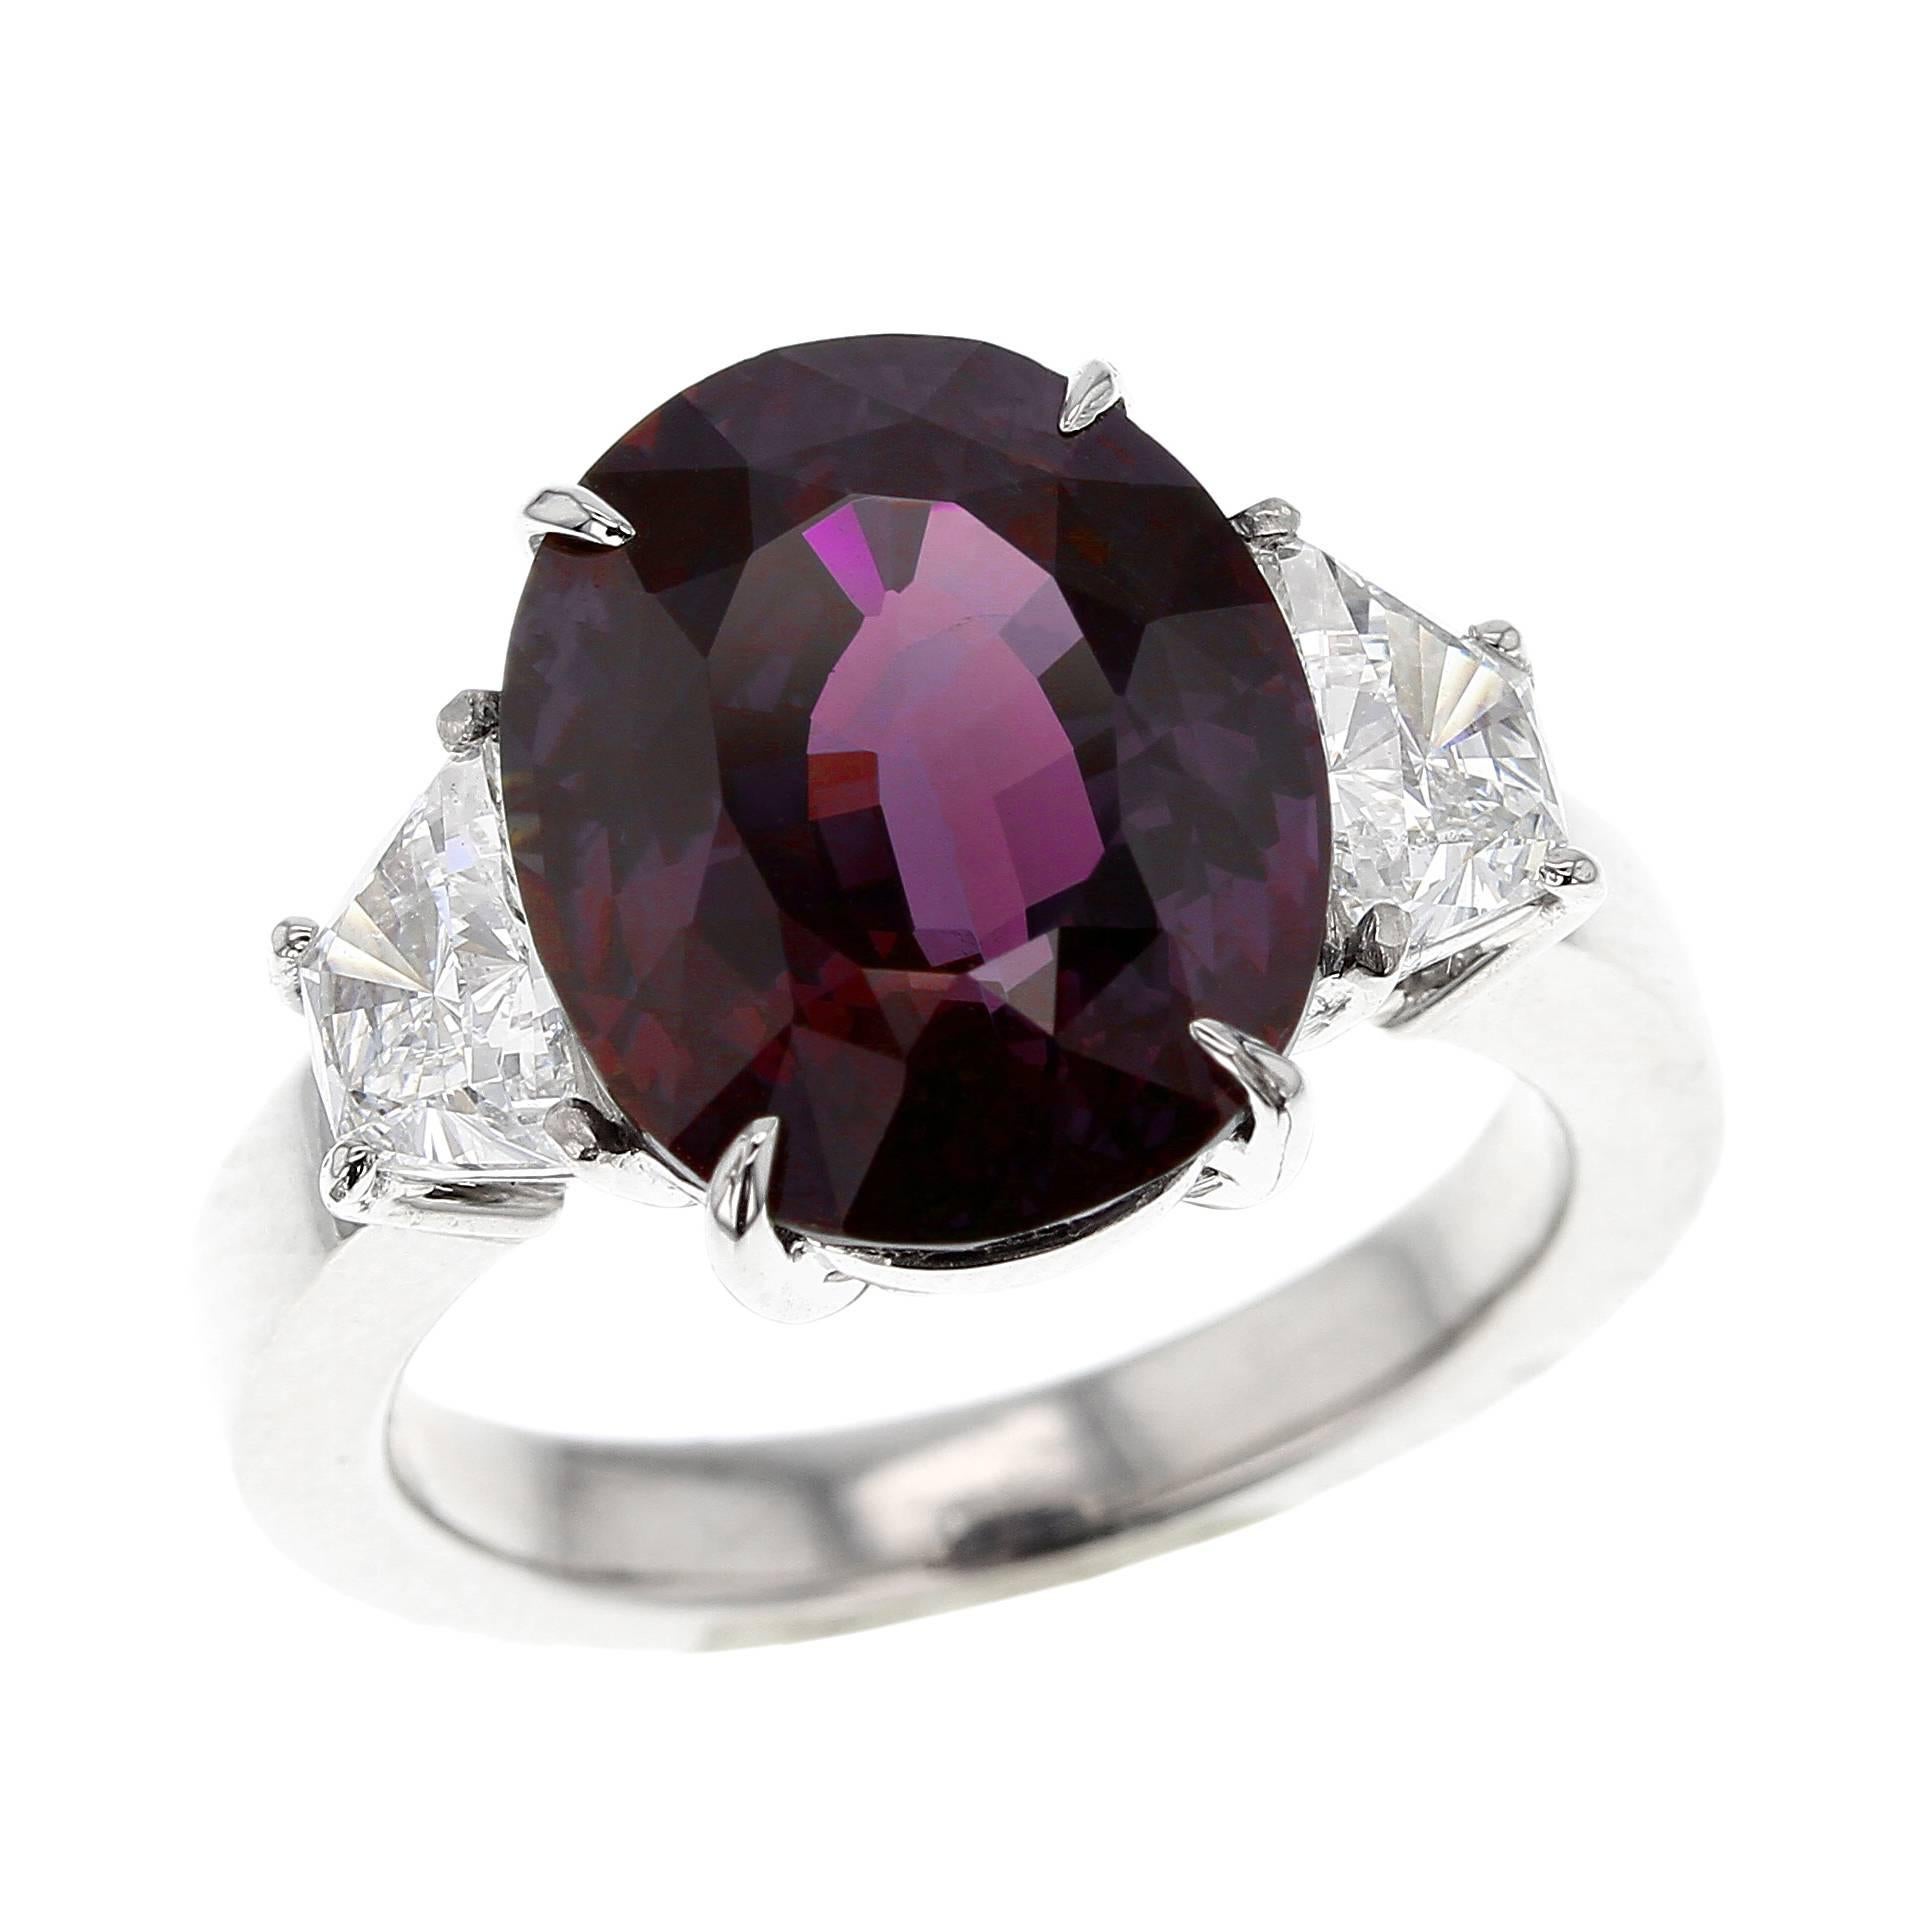 An exceptional and magnificent ring centered with a Brazillian Alexandrite impressively weighing over 8 carats, accented with two trapezoid mixed-cut diamonds weighing approximately 1.03 carats. The center stone accompanies a gemological certificate